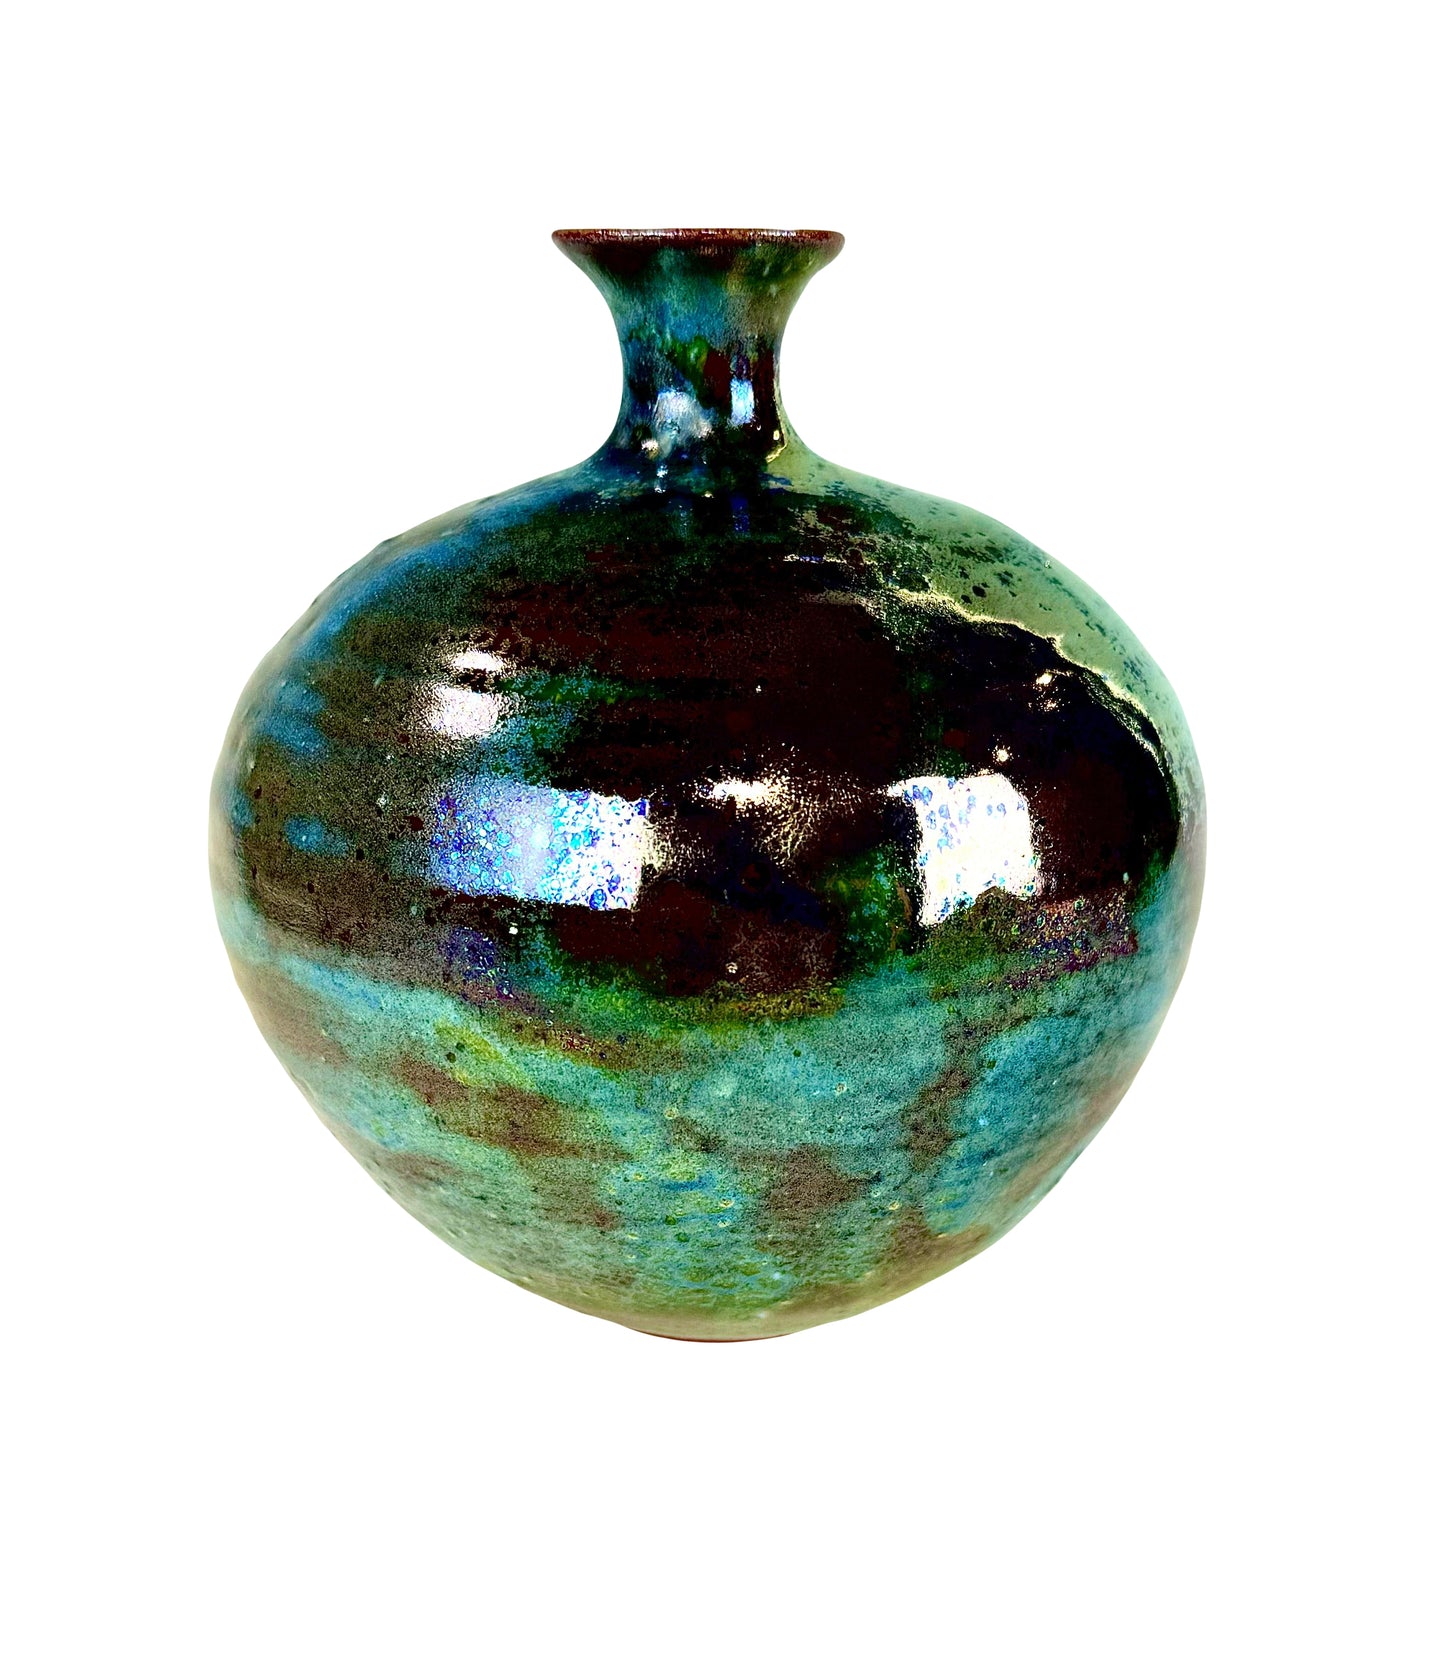 Blue, Green, and Brown Reticulated Luster Glaze Vase